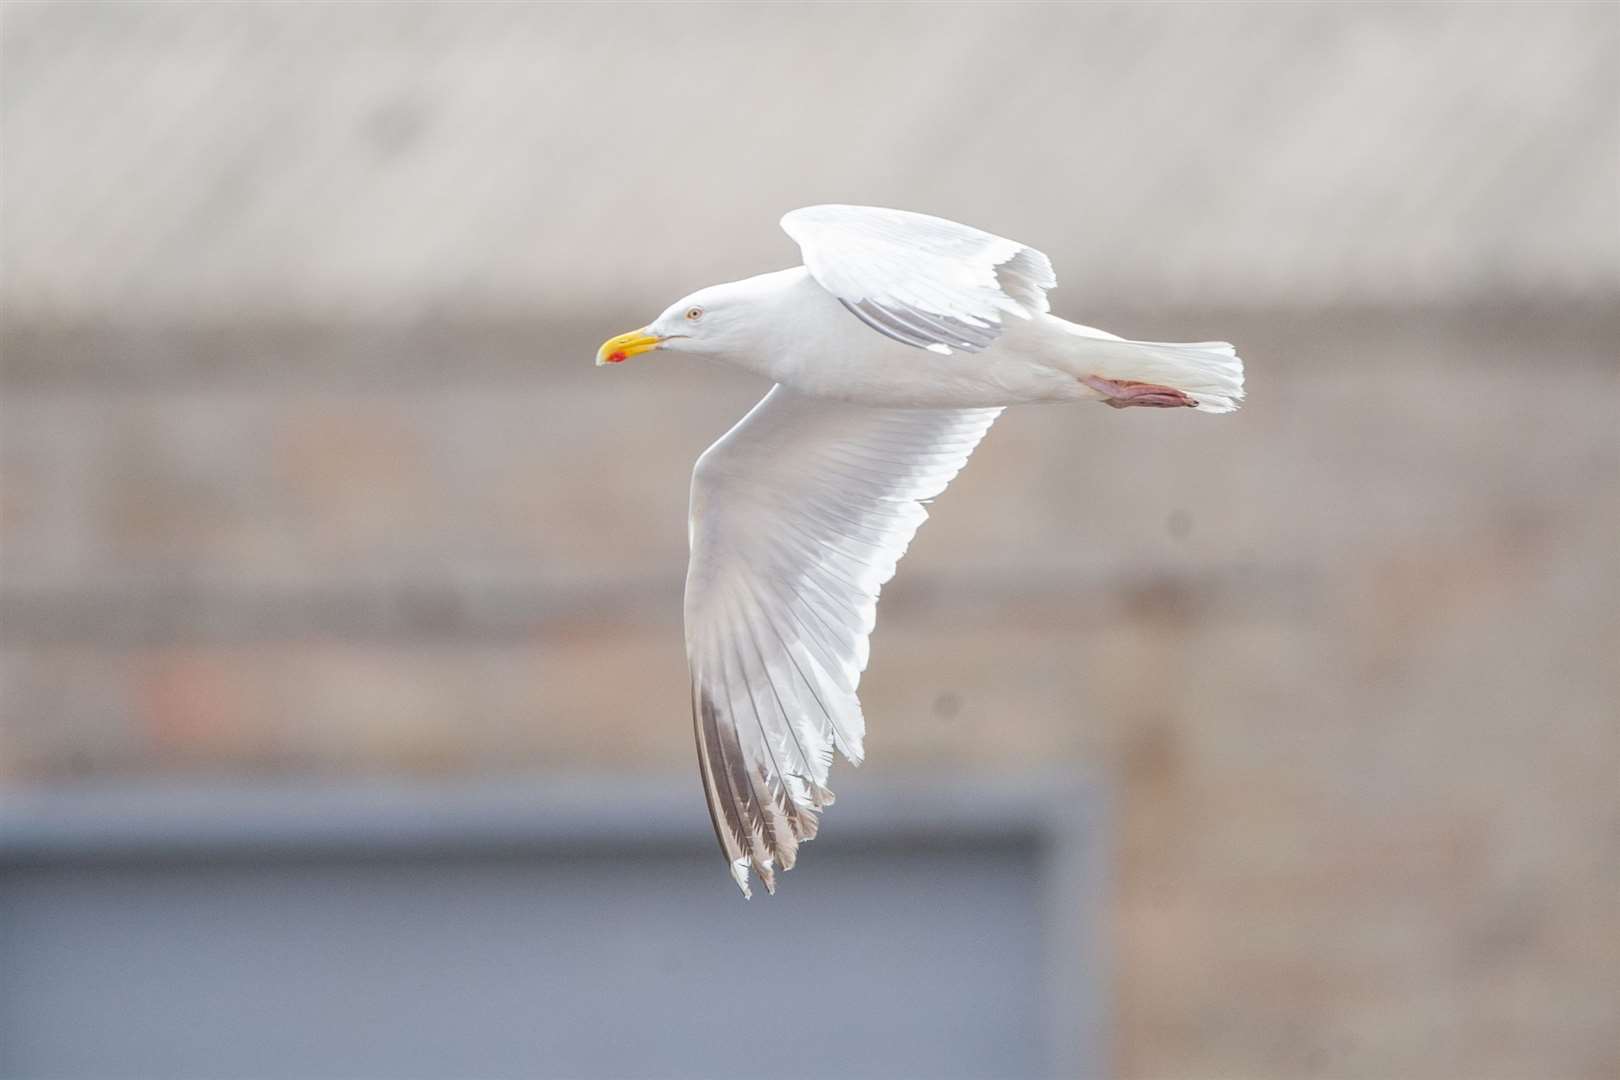 Seagulls are a habitual problem in Moray towns.